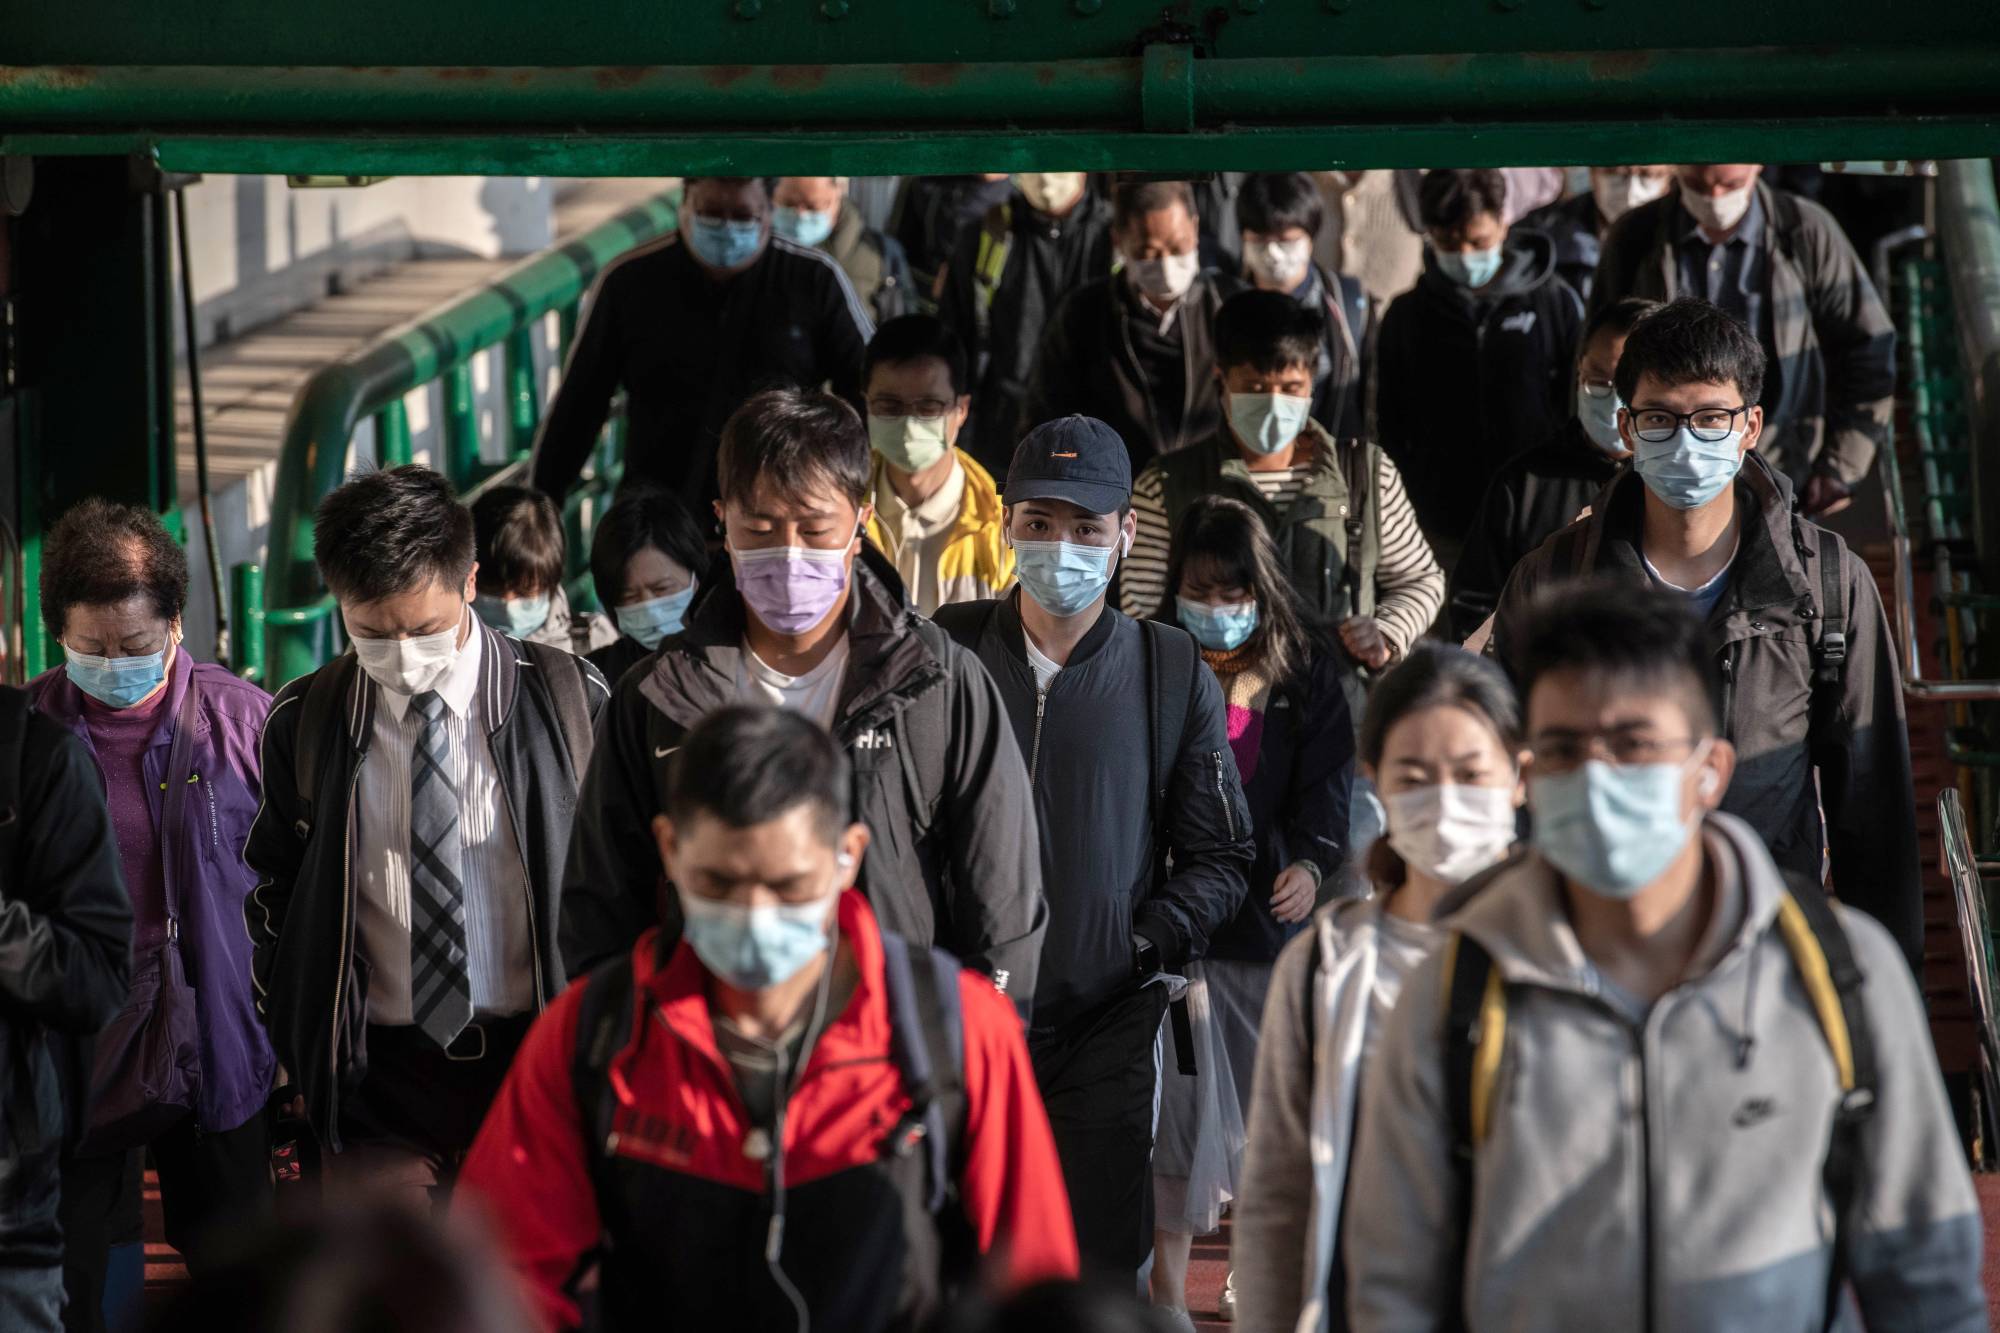 Masks, already a common sight in several East Asian nations before the pandemic, have now become ubiquitous as a simple measure against the virus. | BLOOMBERG